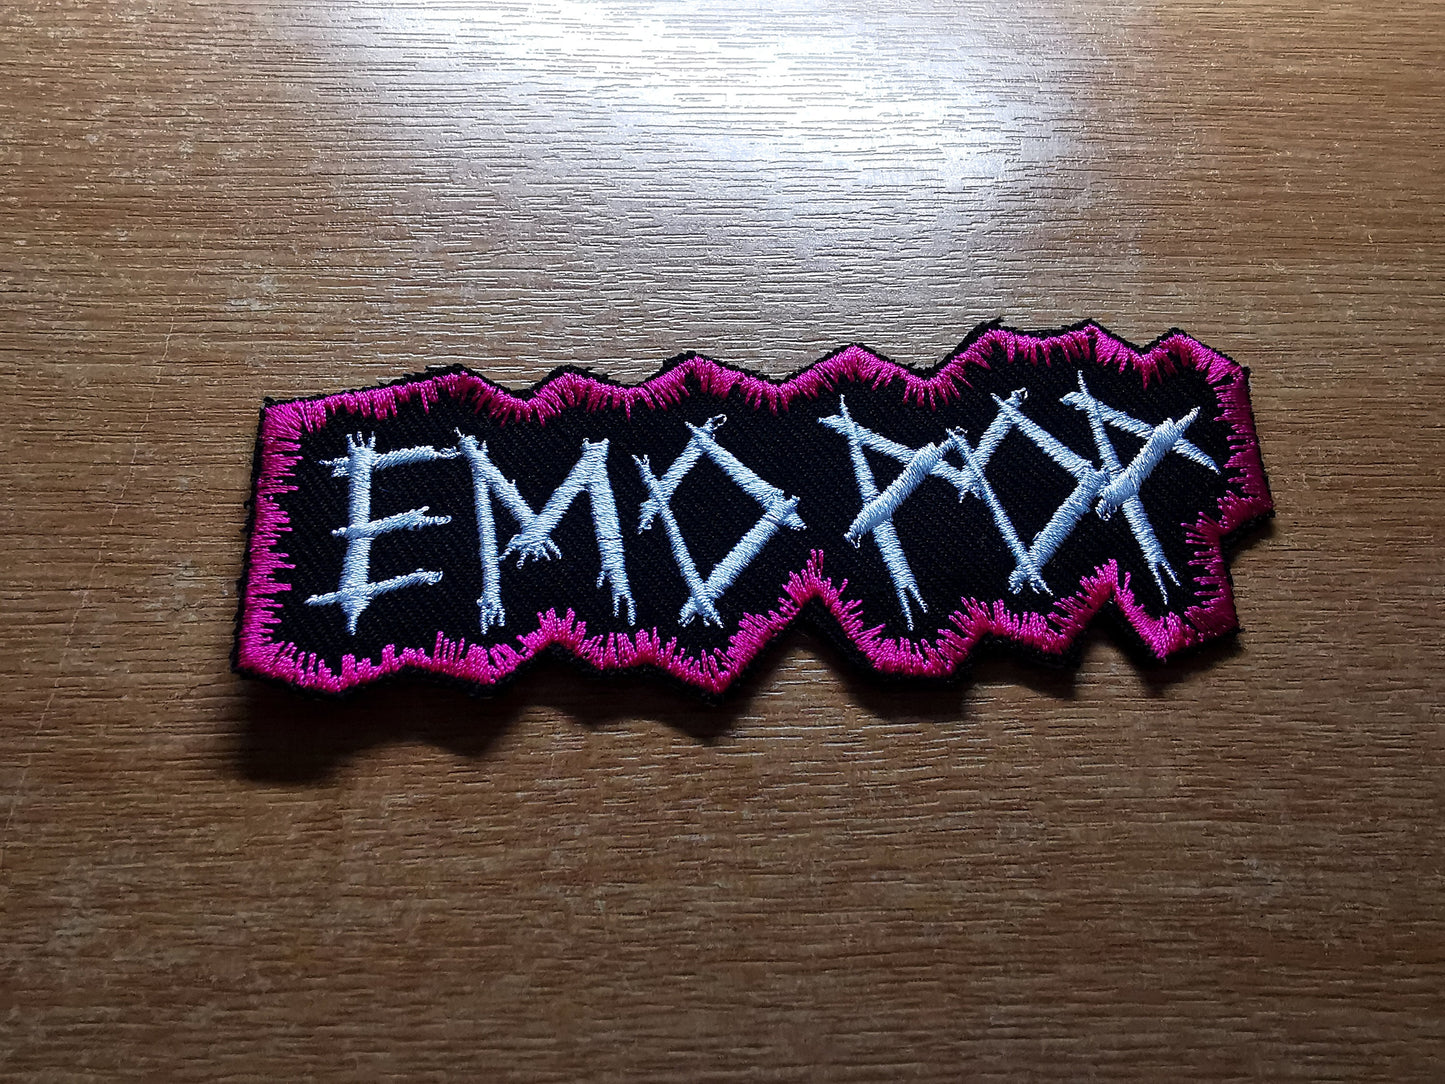 Emo Pop Embroidered Patch Pop Punk Metalcore 00s Culture Throwback